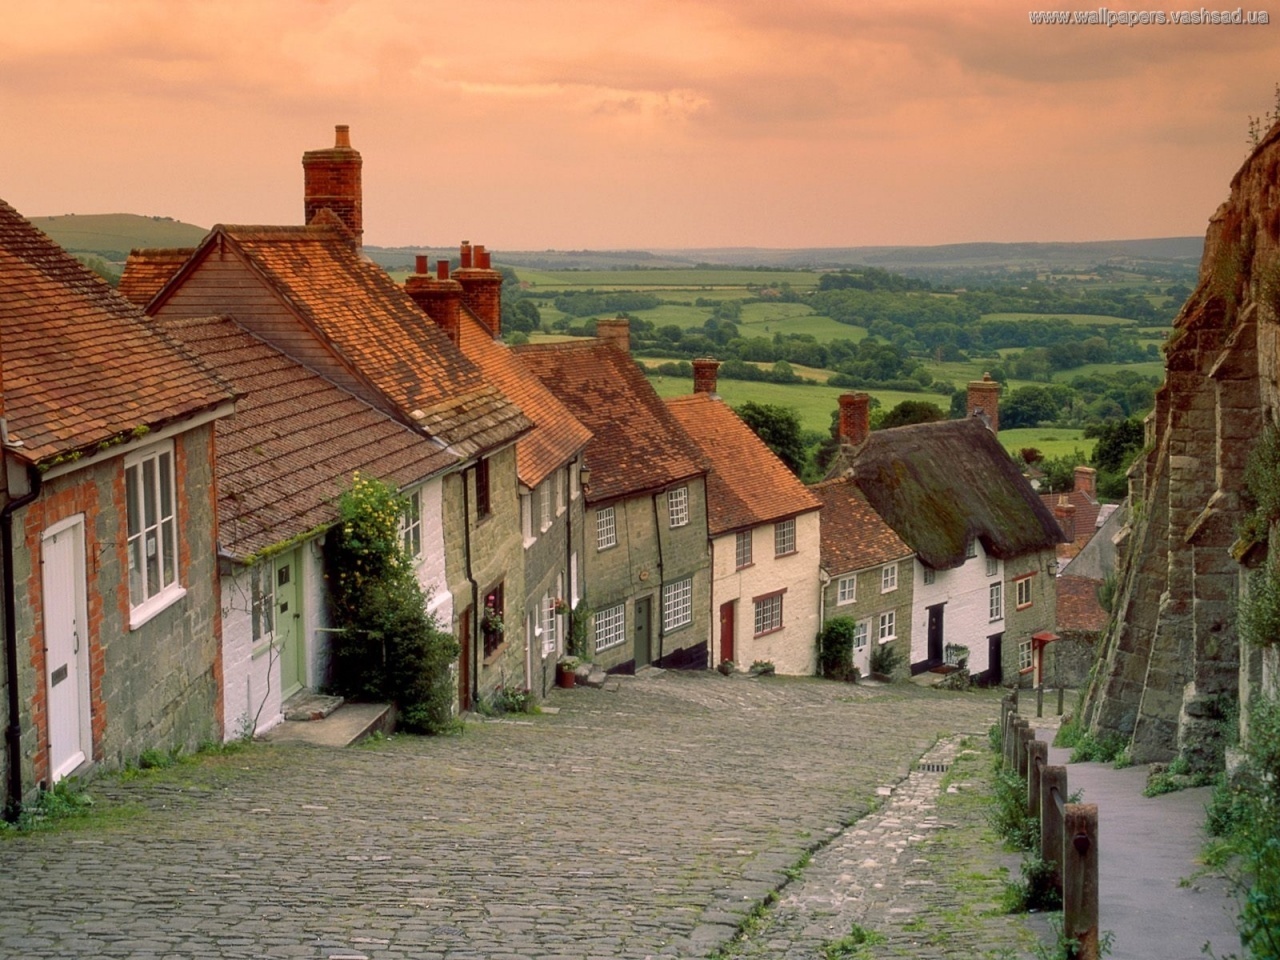 houses, streets, landscape, architecture collection of HD images